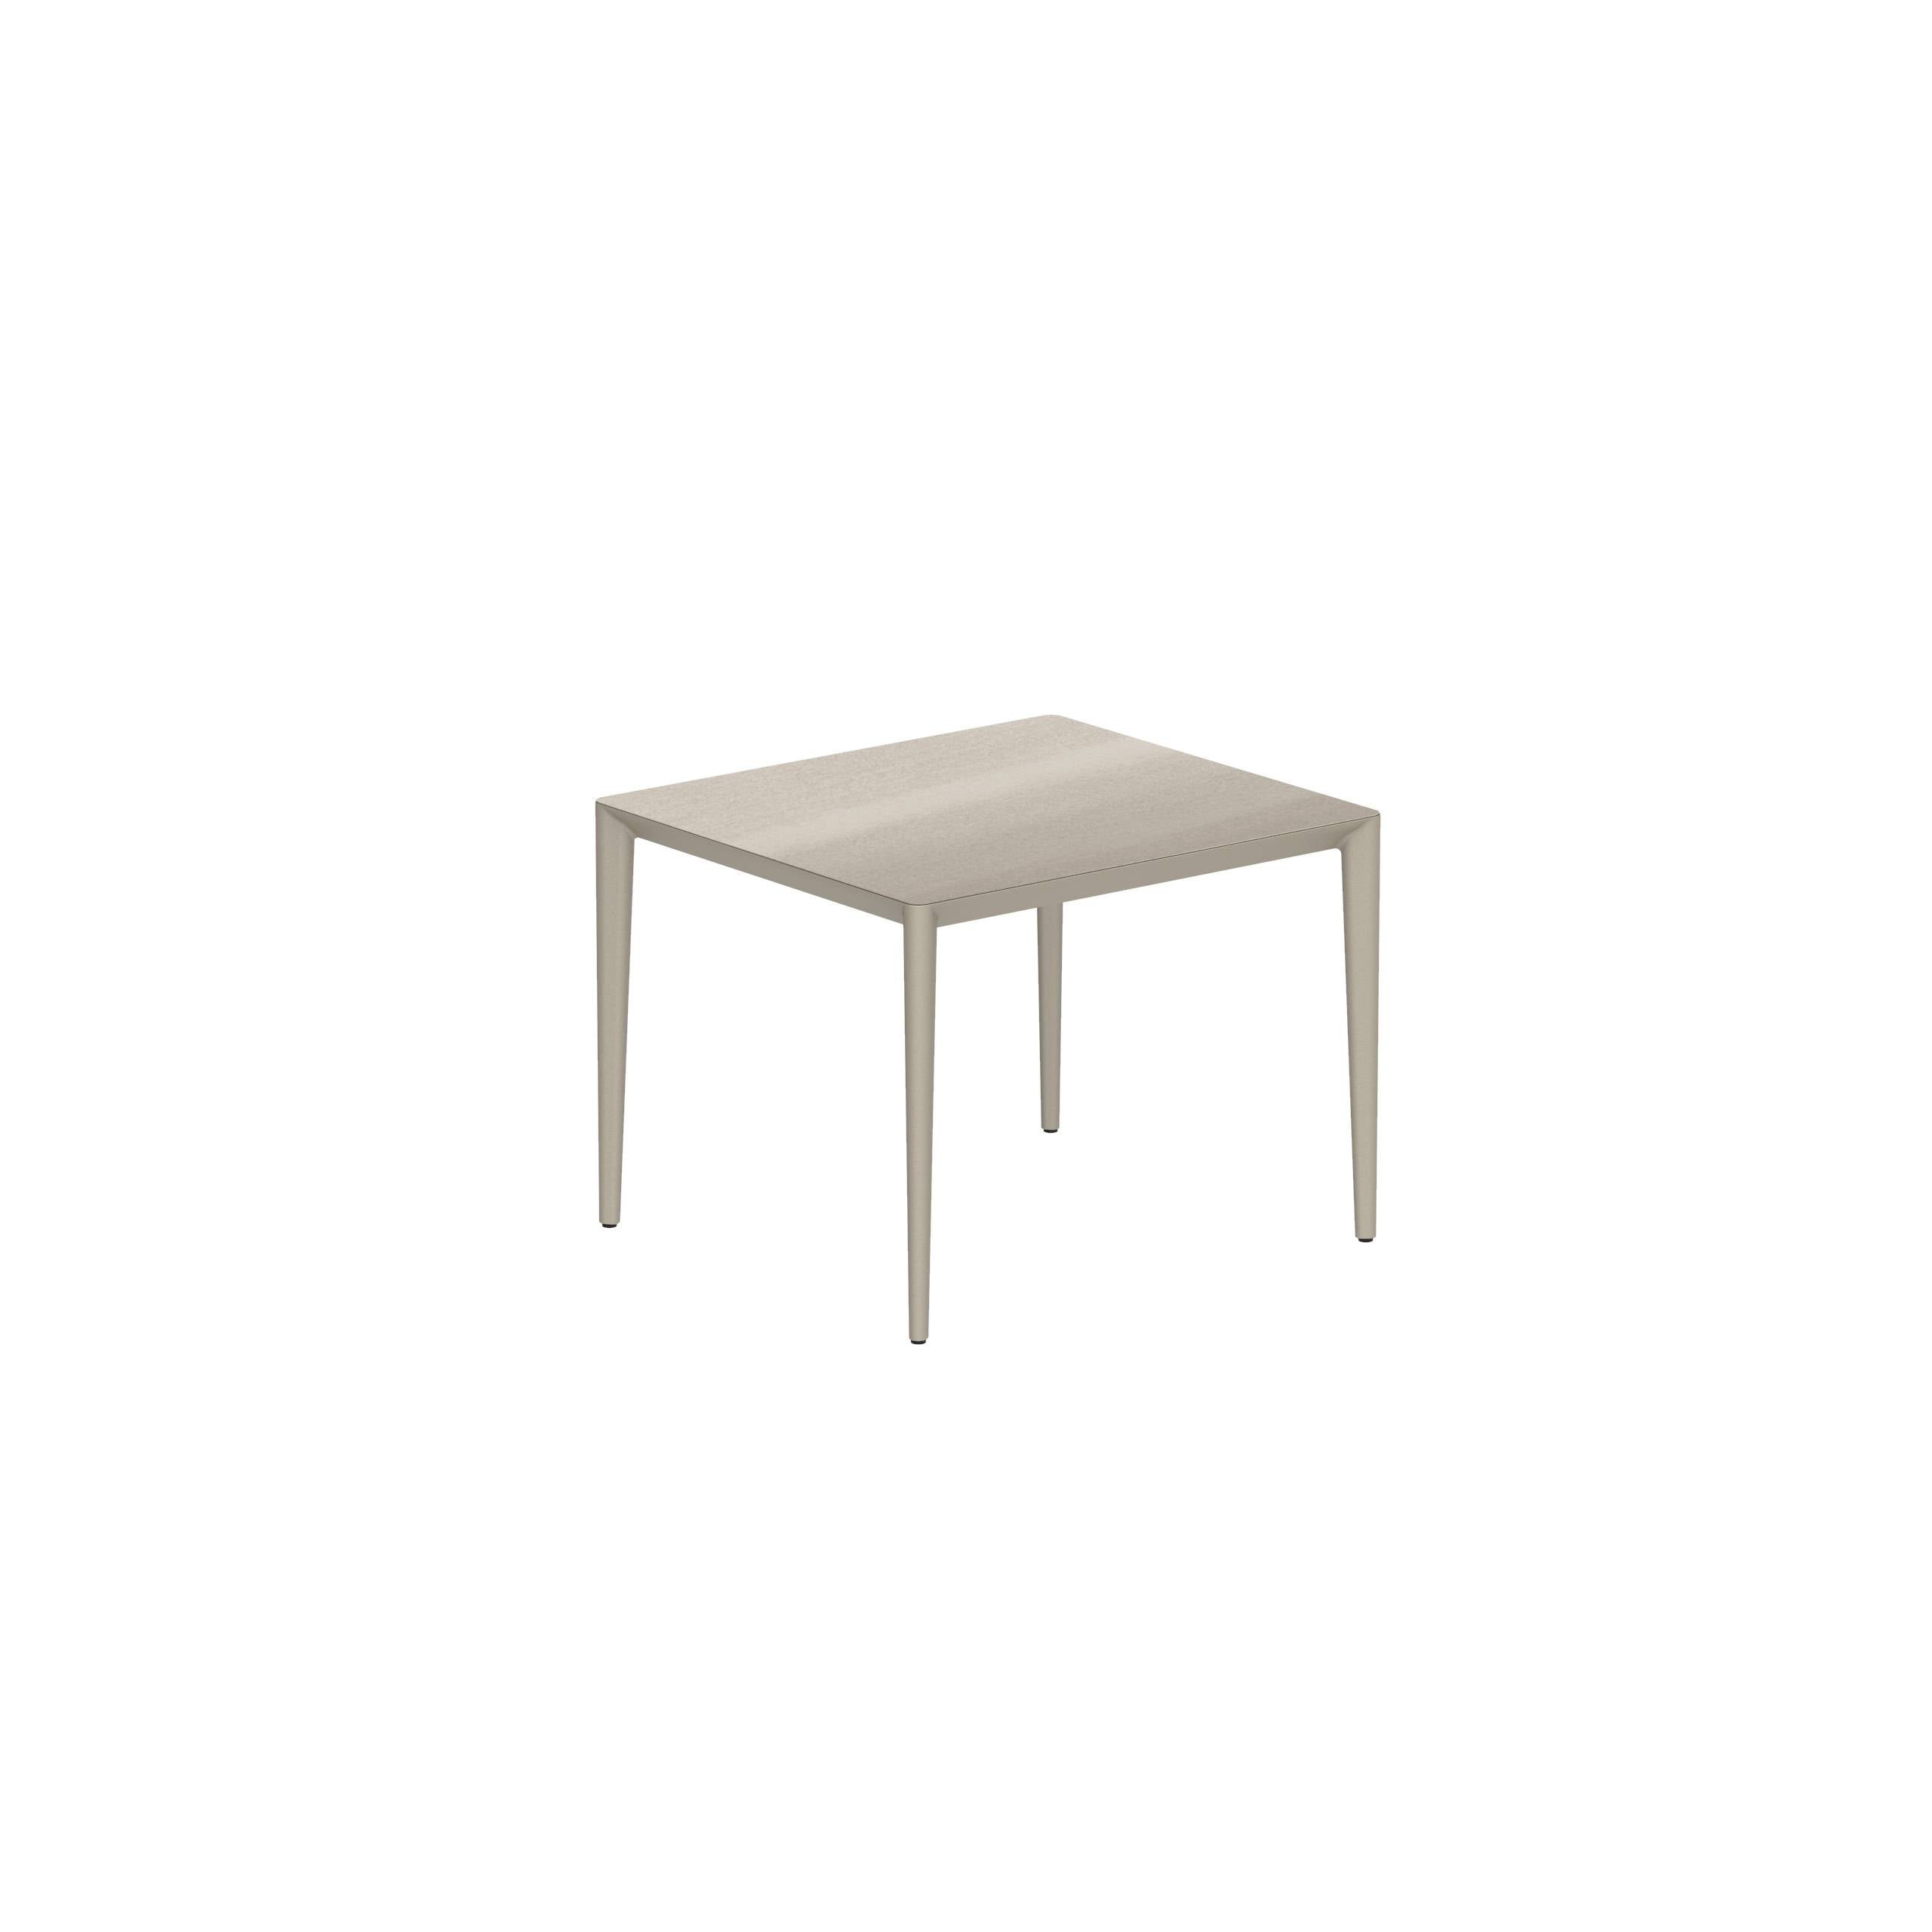 U-Nite Table 100x90cm Sand With Ceramic Tabletop In Taupe Grey